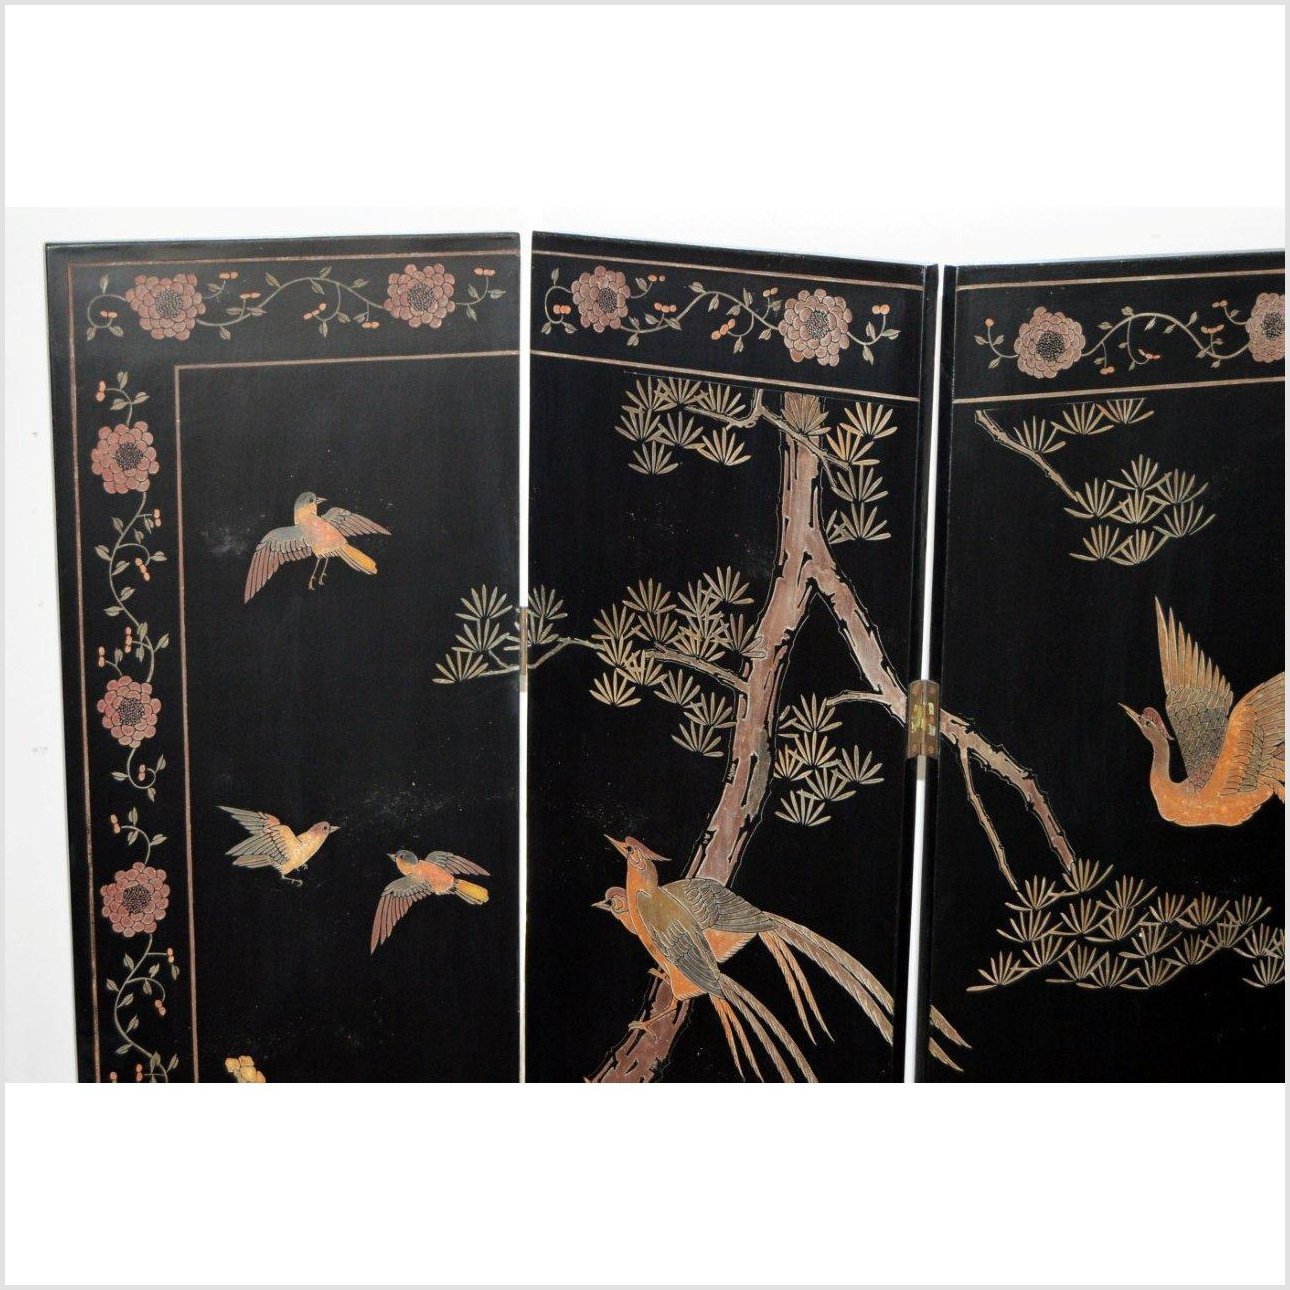 4-Panel Black Screen Designed with Trees, Birds and Flowers-YN2889-9. Asian & Chinese Furniture, Art, Antiques, Vintage Home Décor for sale at FEA Home